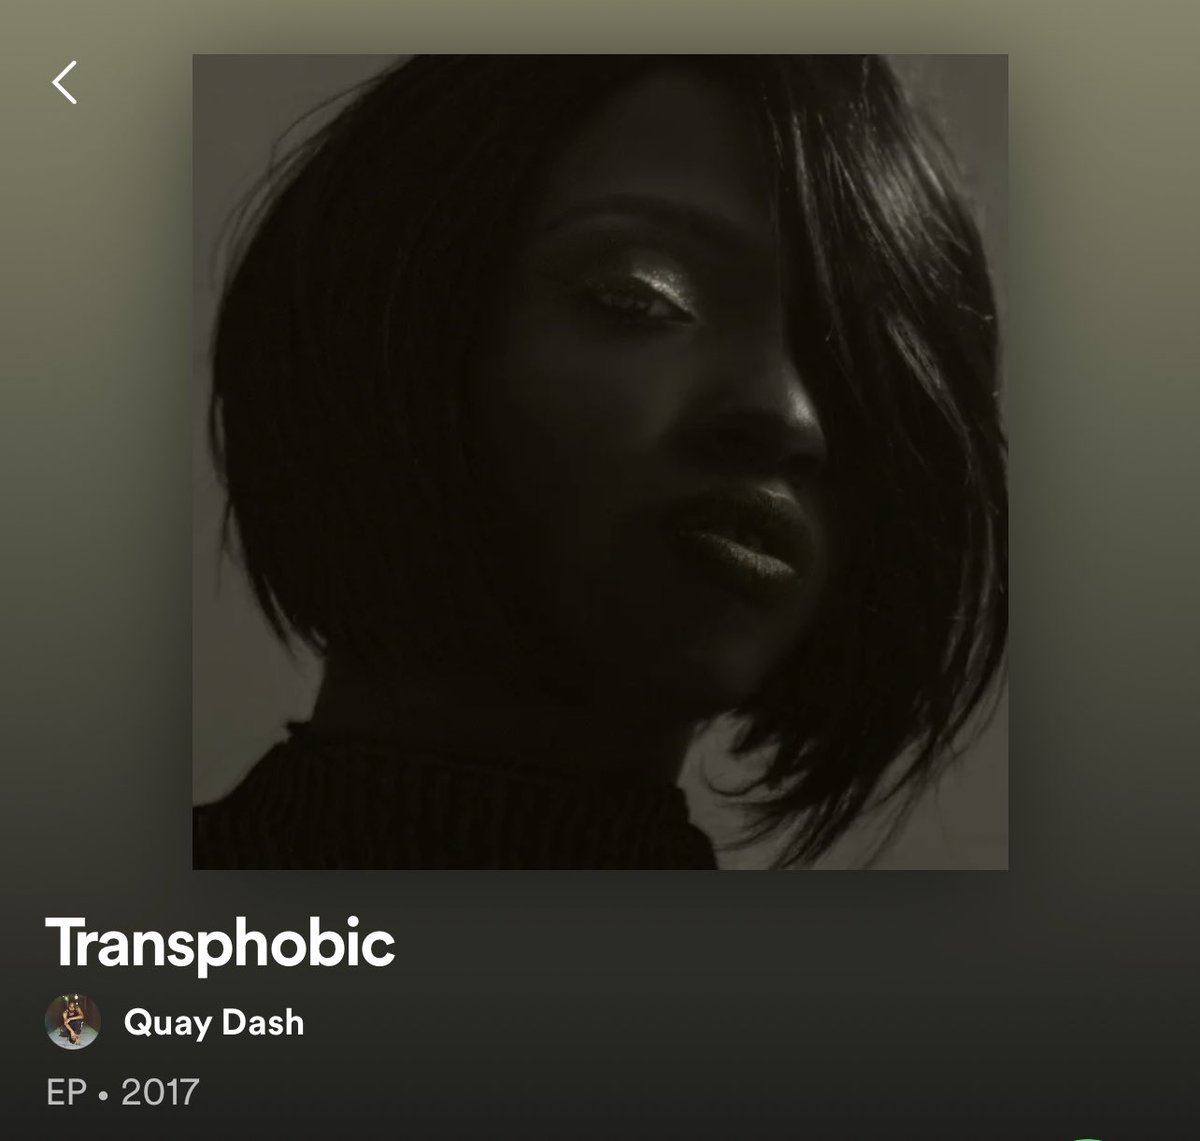 the only thing quay dash’s name should be associated with is her immense talent i’ve listened to this ep since its inception ill always cite it as one of the greatest rap projects of all time